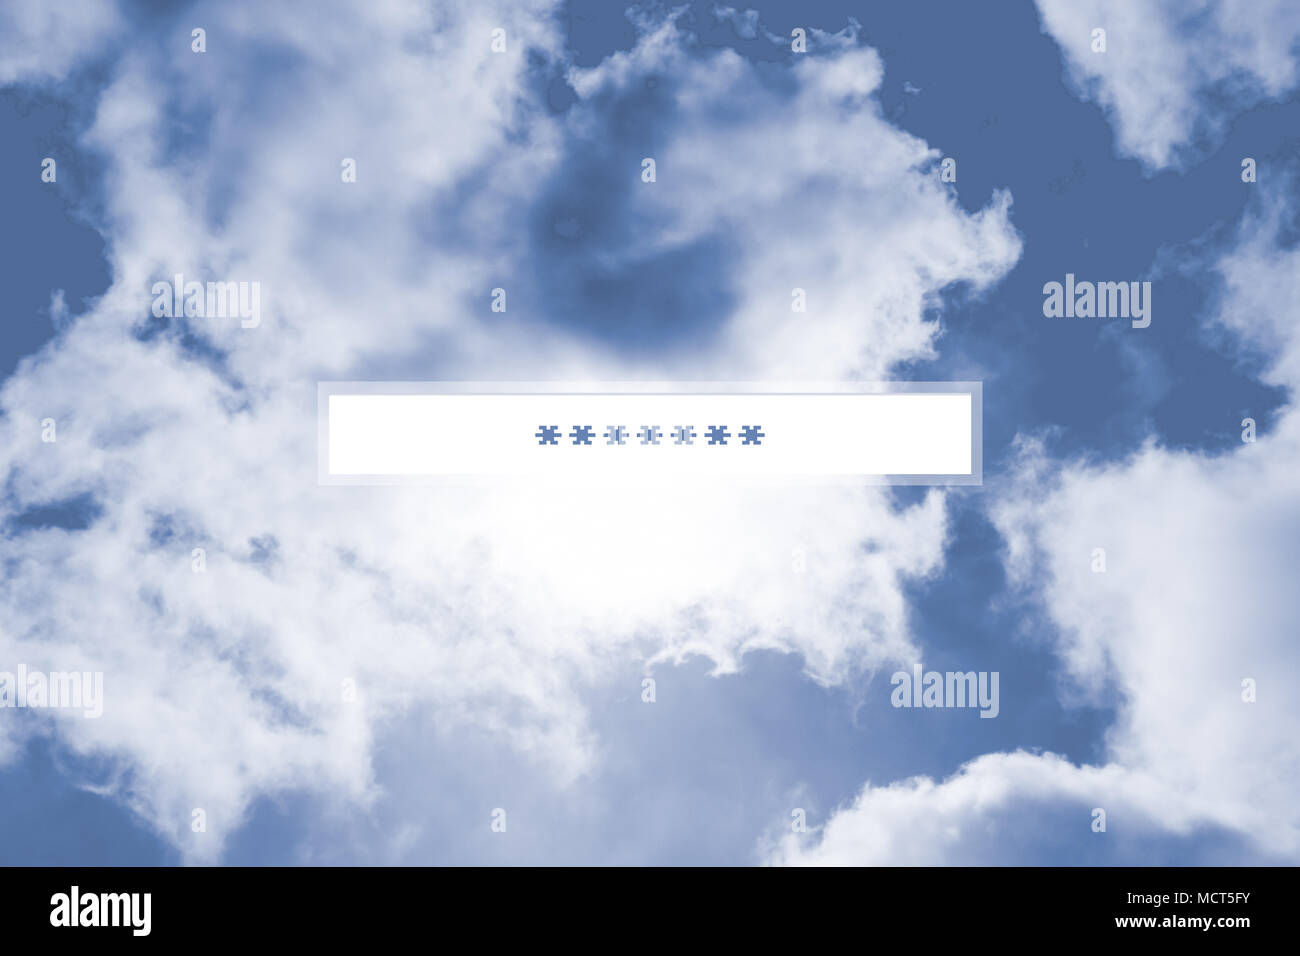 Internet browser on computer screen with login box passwords area graphic. Stock Photo